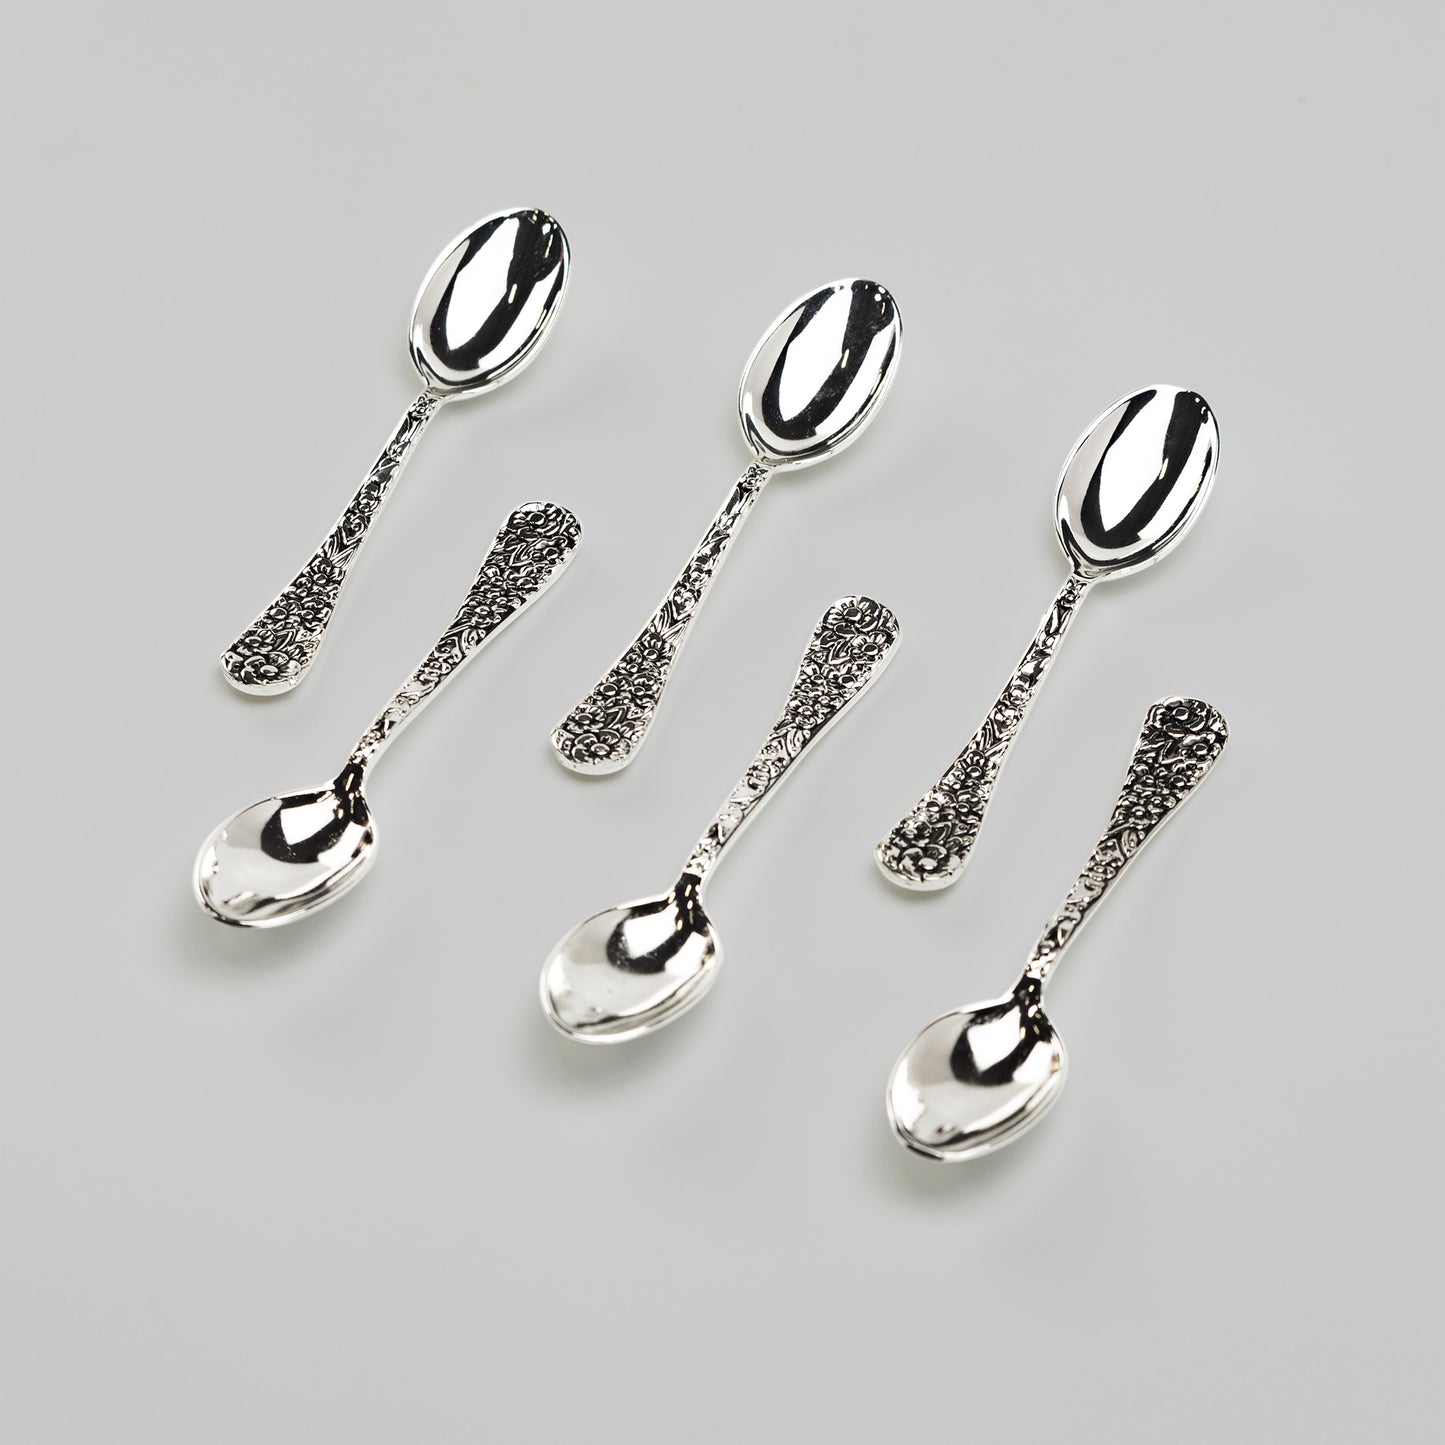 Silver Plated Demi Spoon Set of 6 with Antique Sunflowers Handle Design